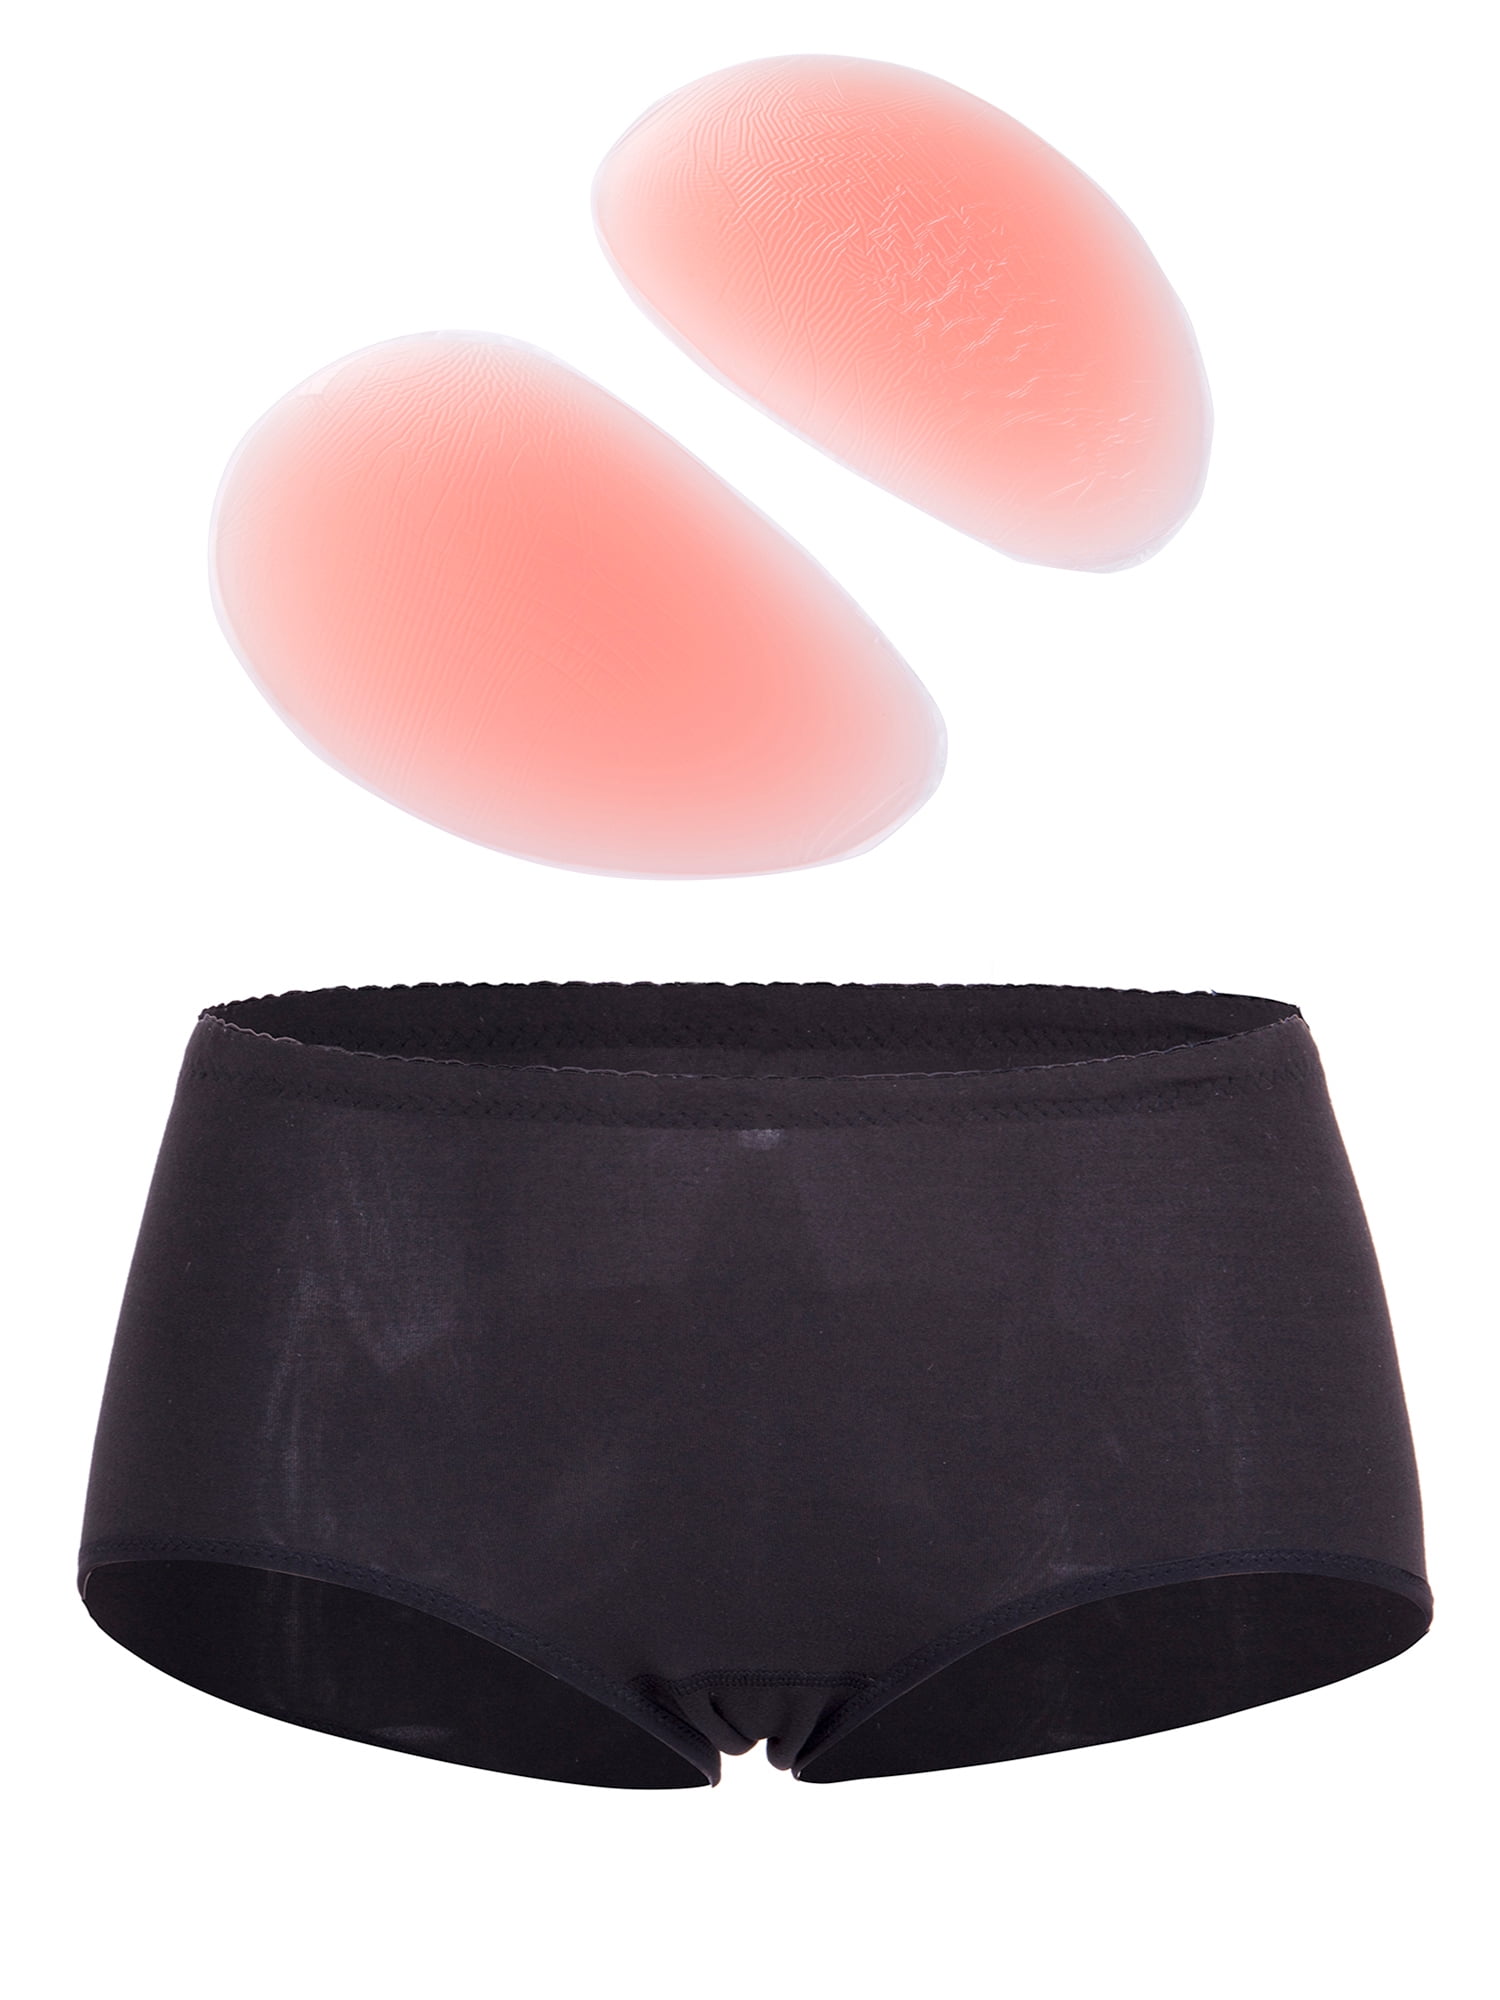 1Pair Padded Enhancing Lifter Contour Butt Hip Sponge Pads for Panties Gifts 